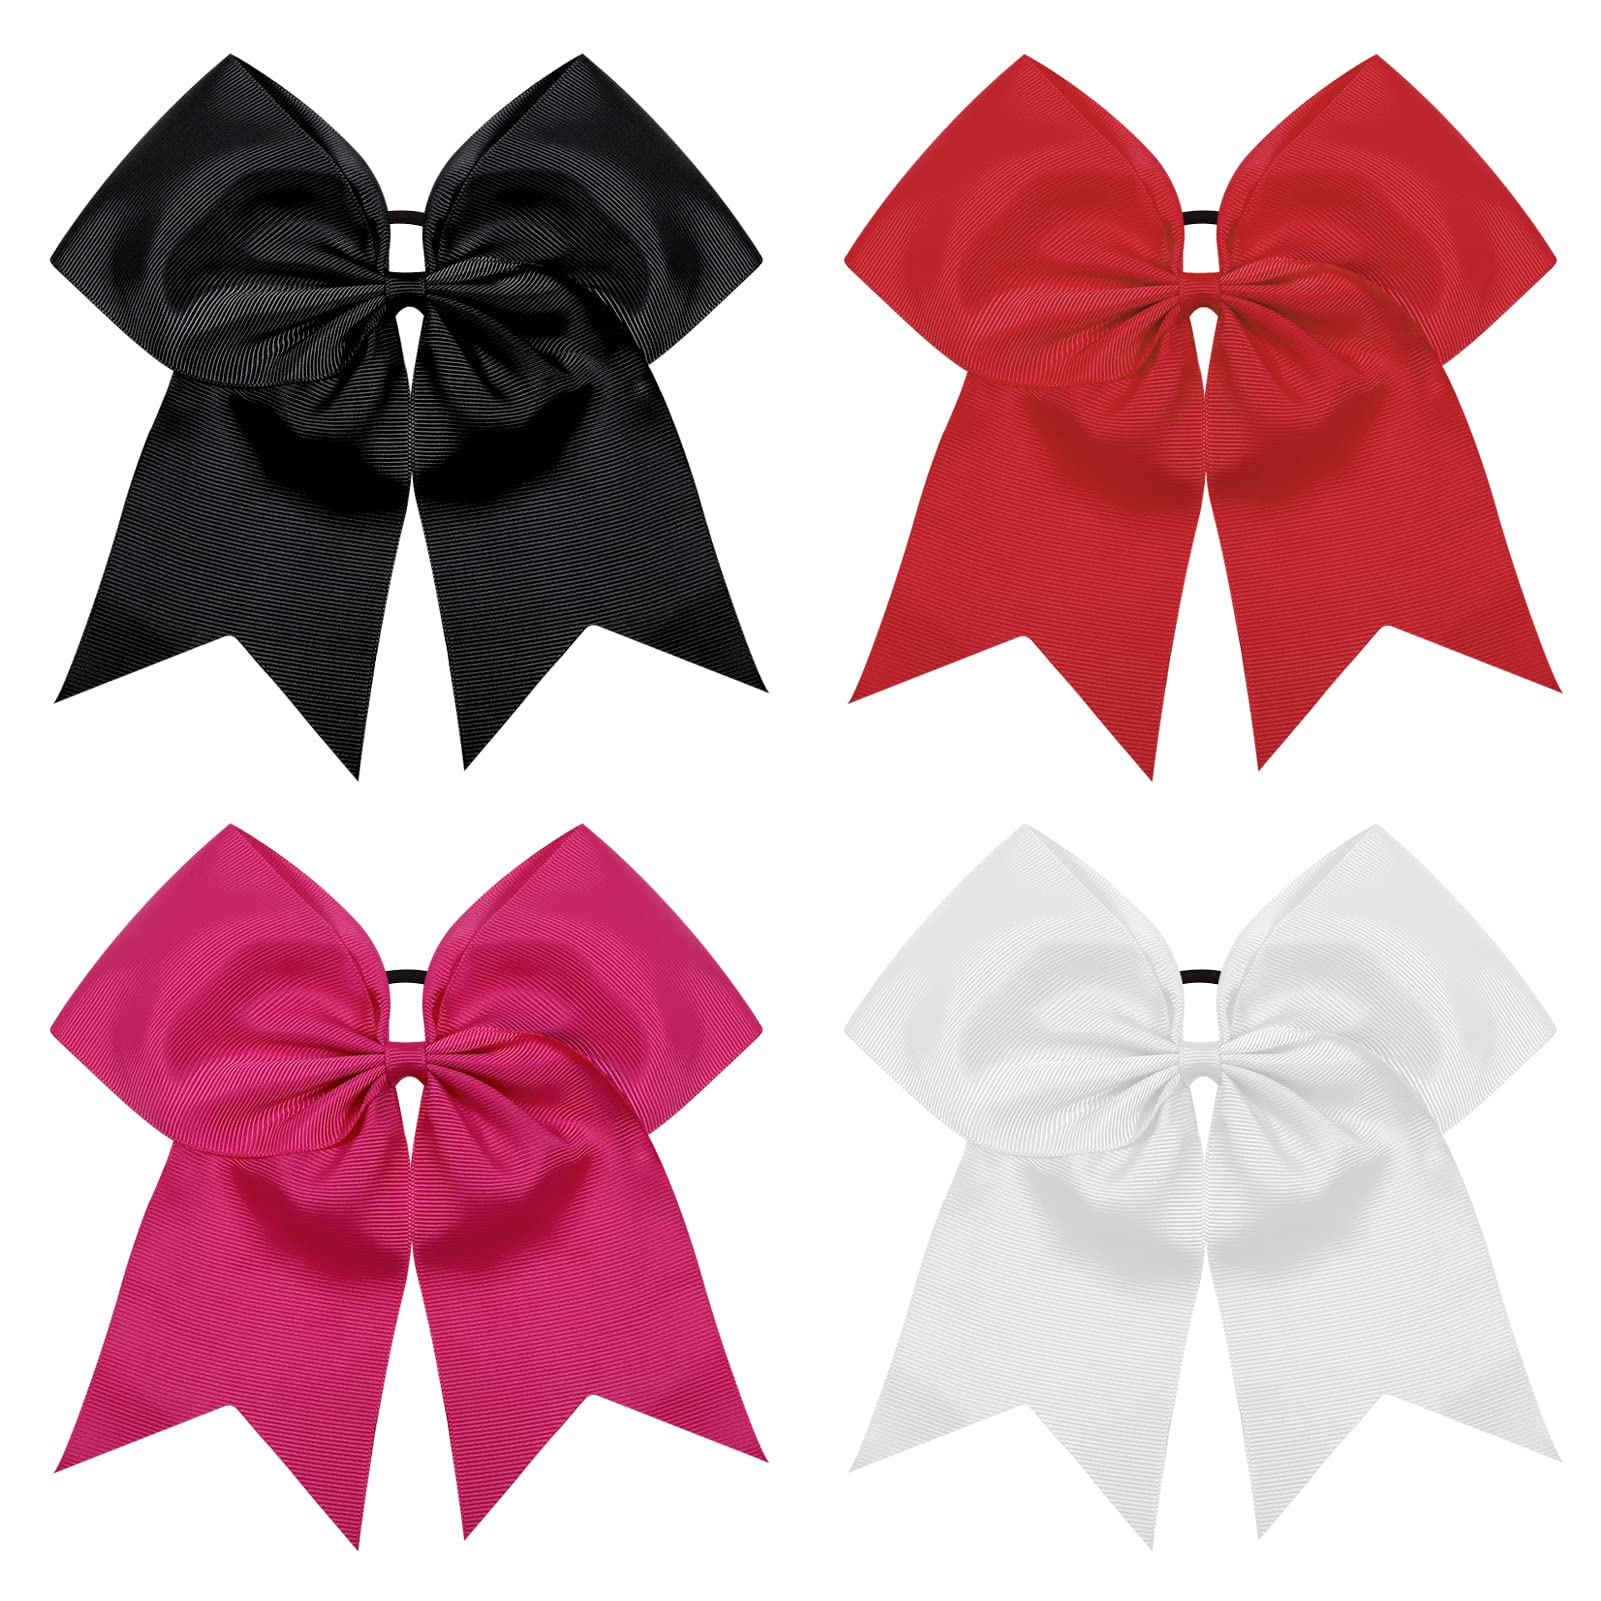 Elastic Collection - Functional and Versatile - Ribbon and Bows Of